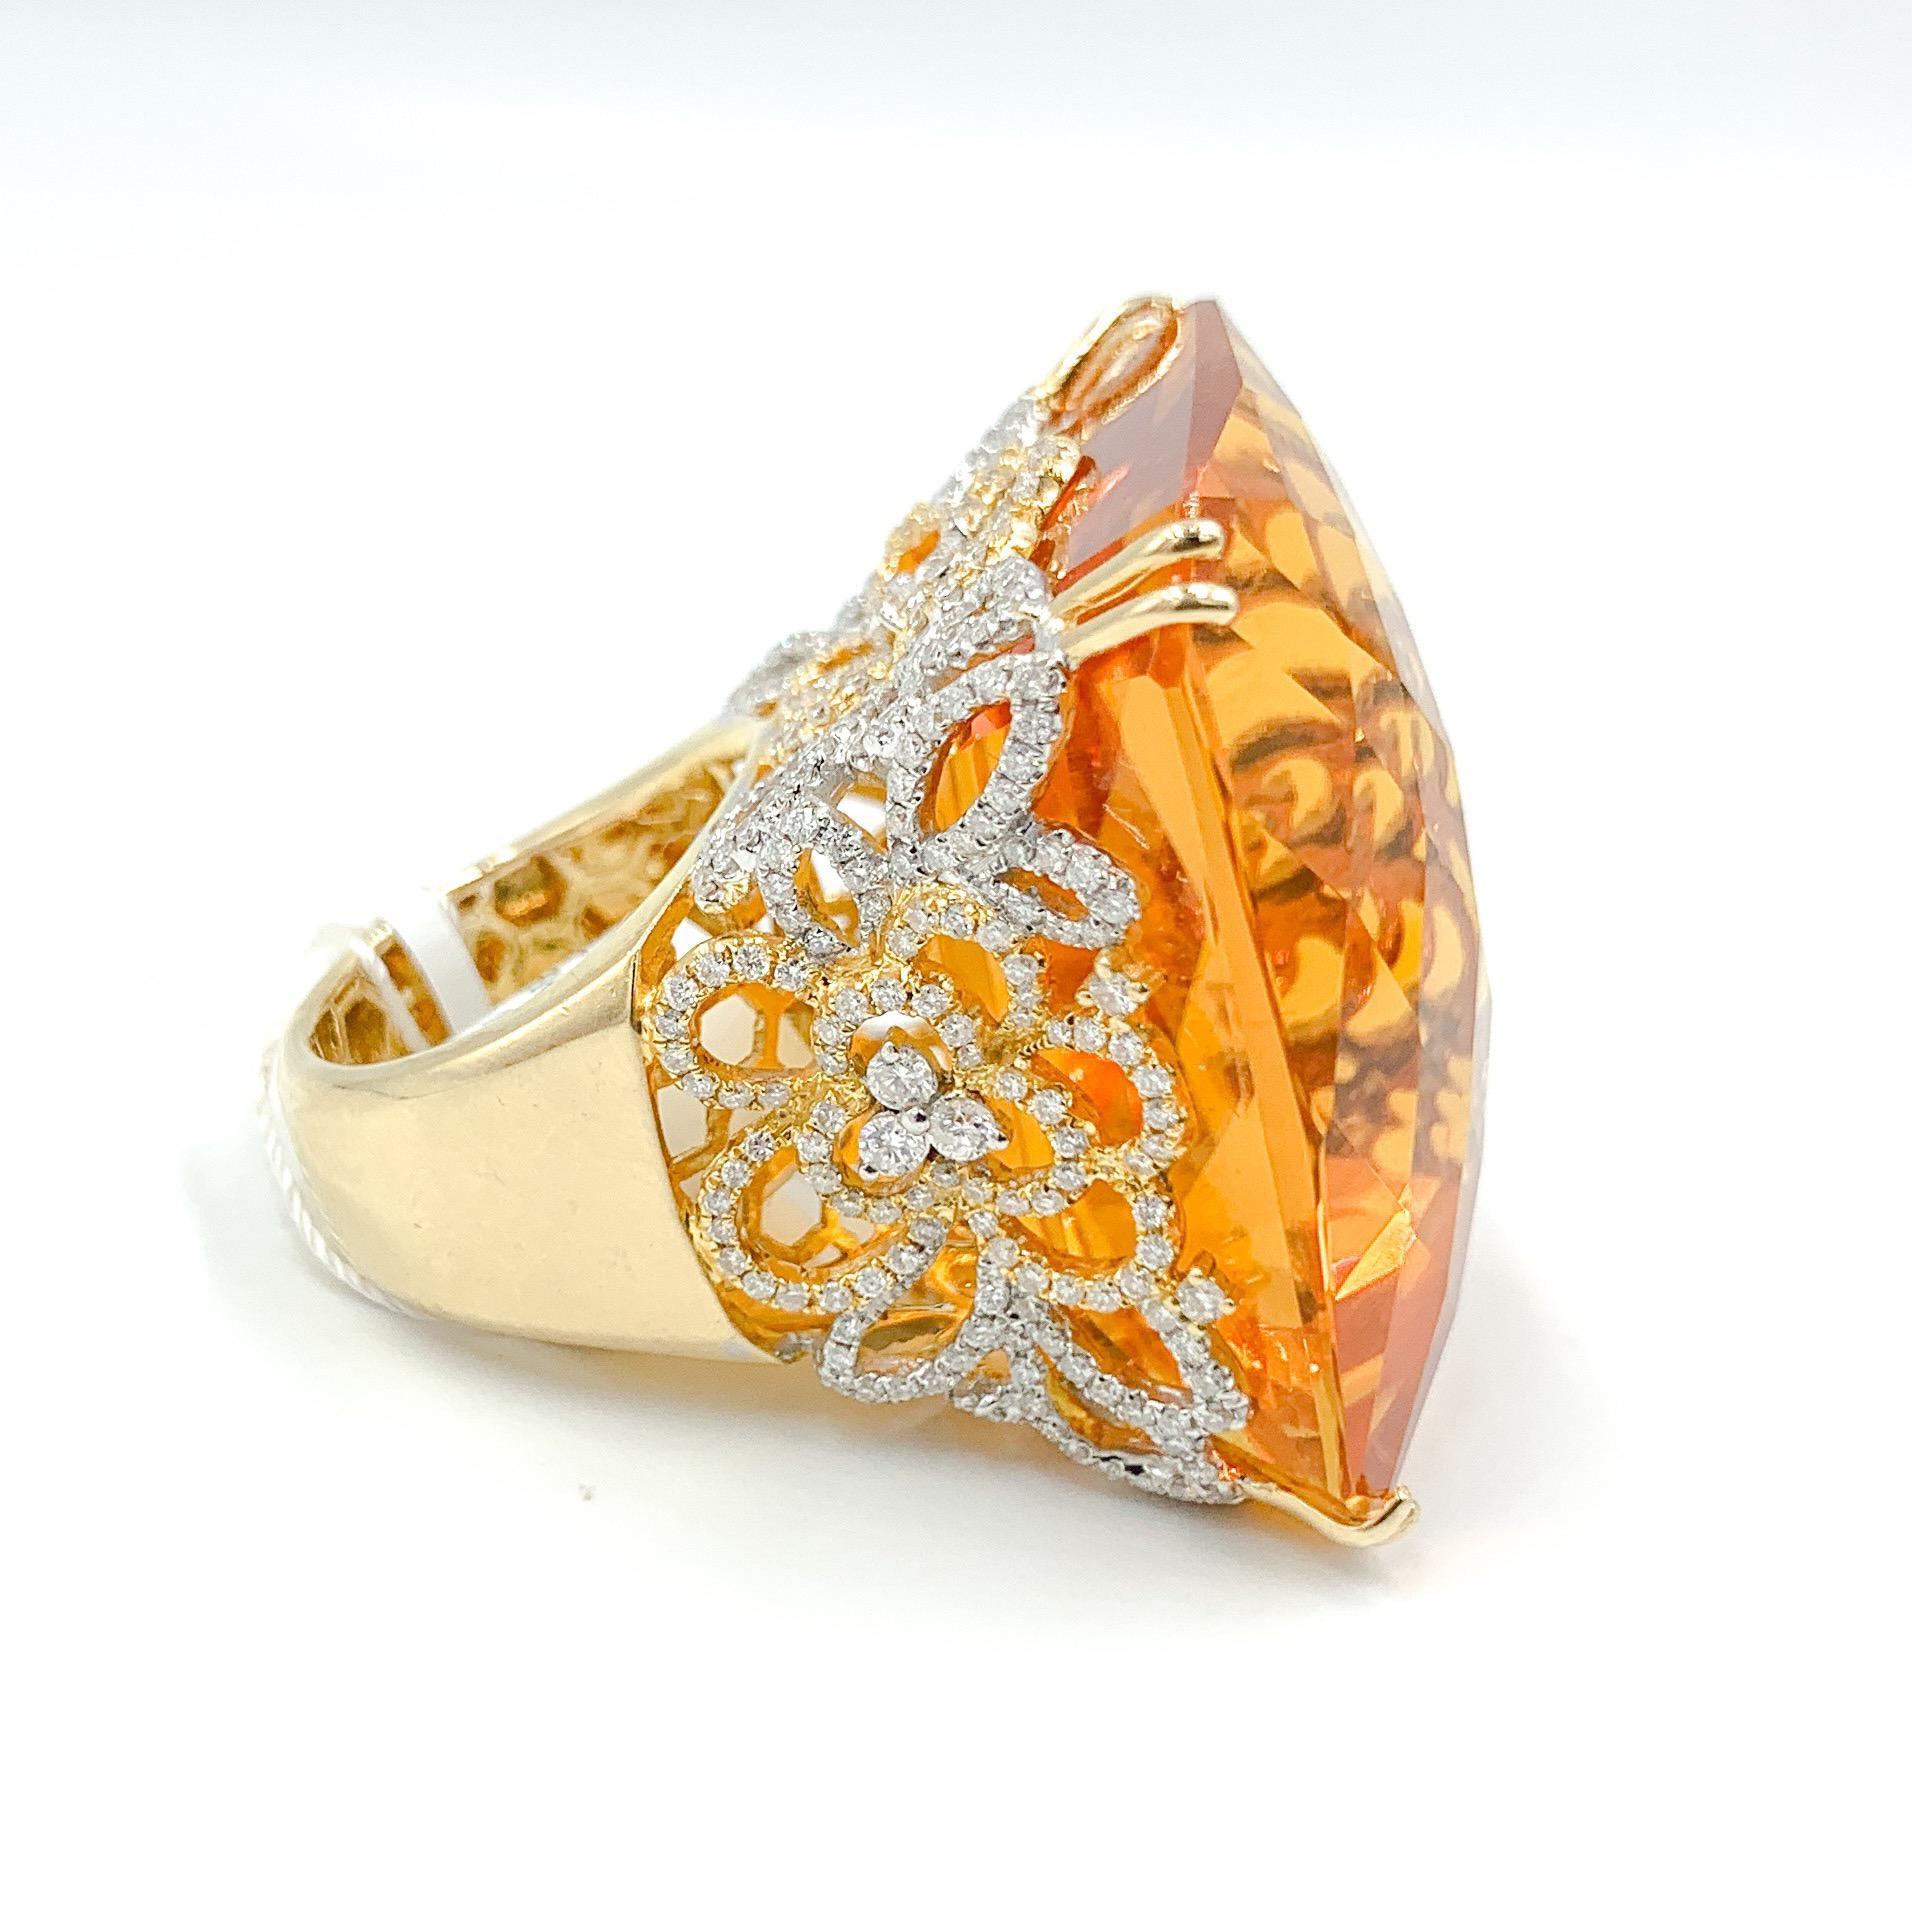 To say this ring is special would be an understatement. The sole focus of this one-of-a-kind piece is the 138 carat shield cut citrine that sits proudly in a crown of 18k white and yellow gold. The setting is adorned with 3.60 carats of F/G color,